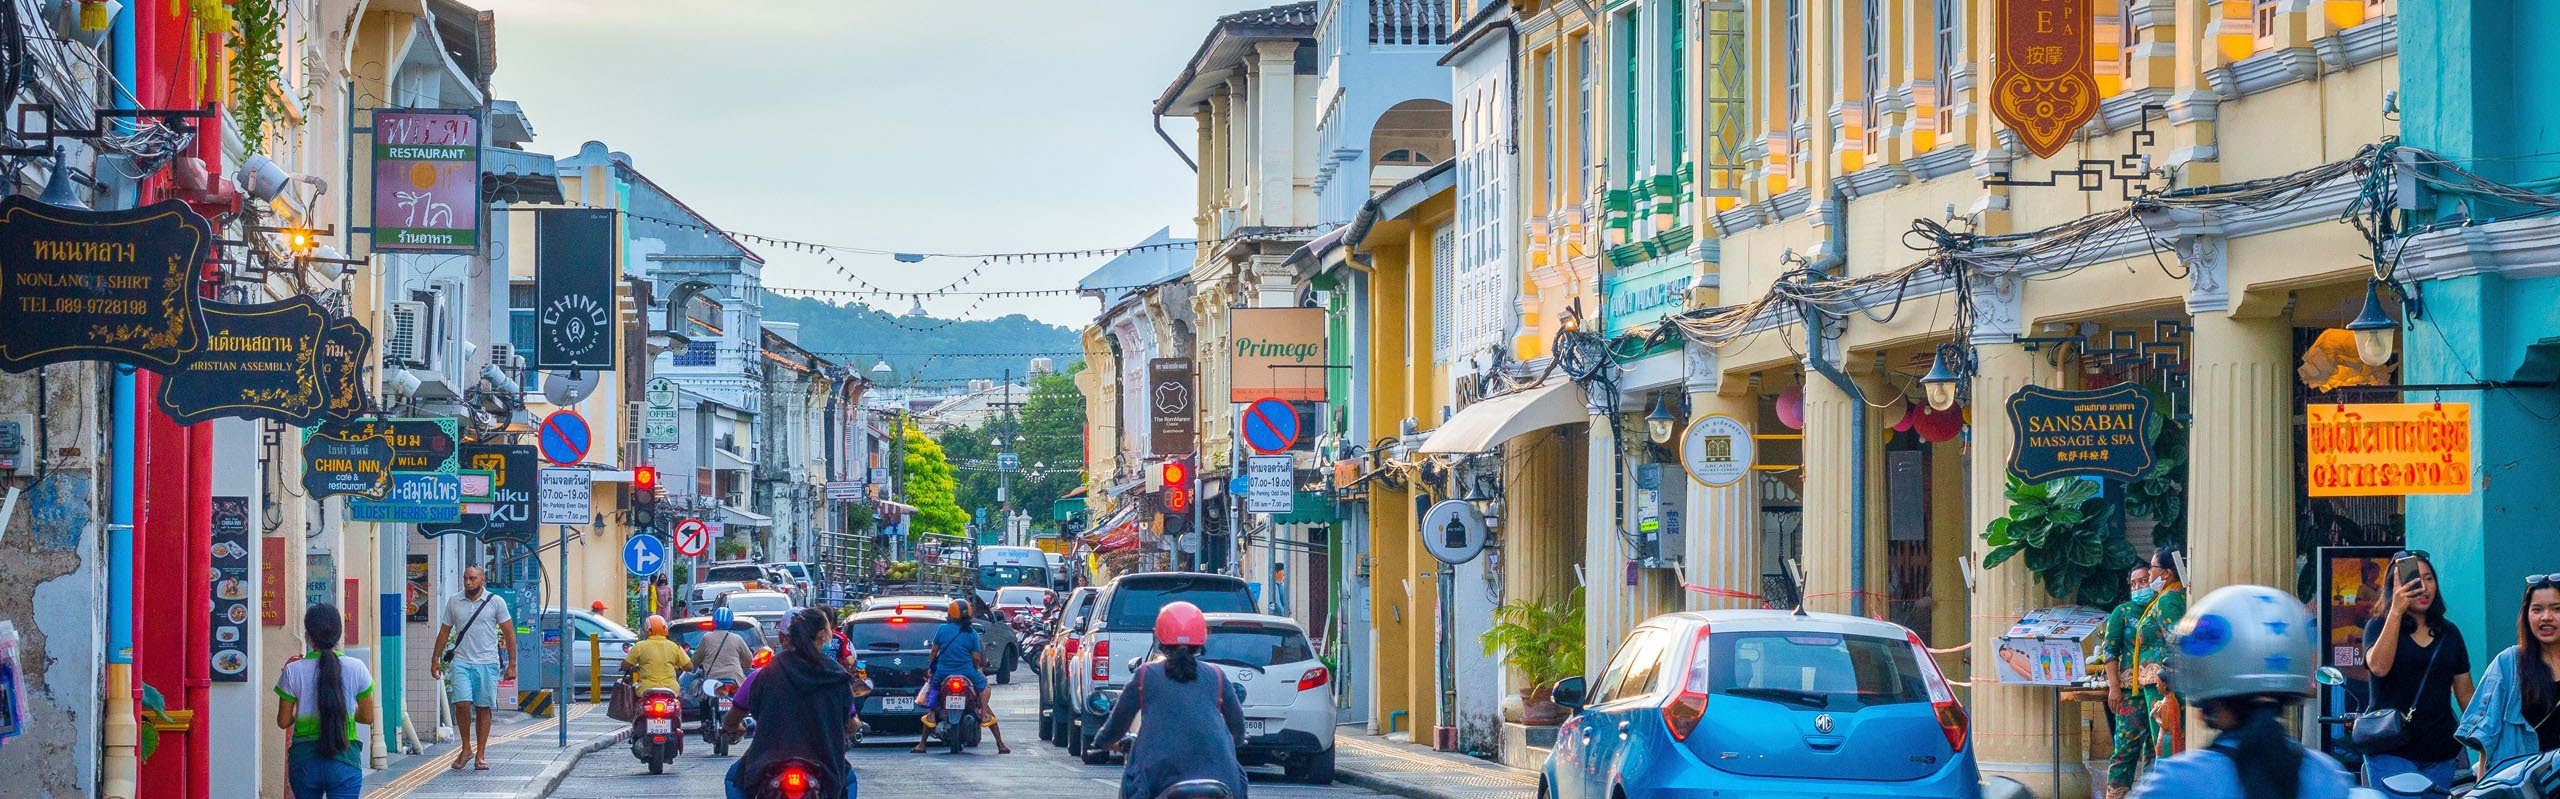 Phuket Old Town: Best Things to Do, Walking Guide Map